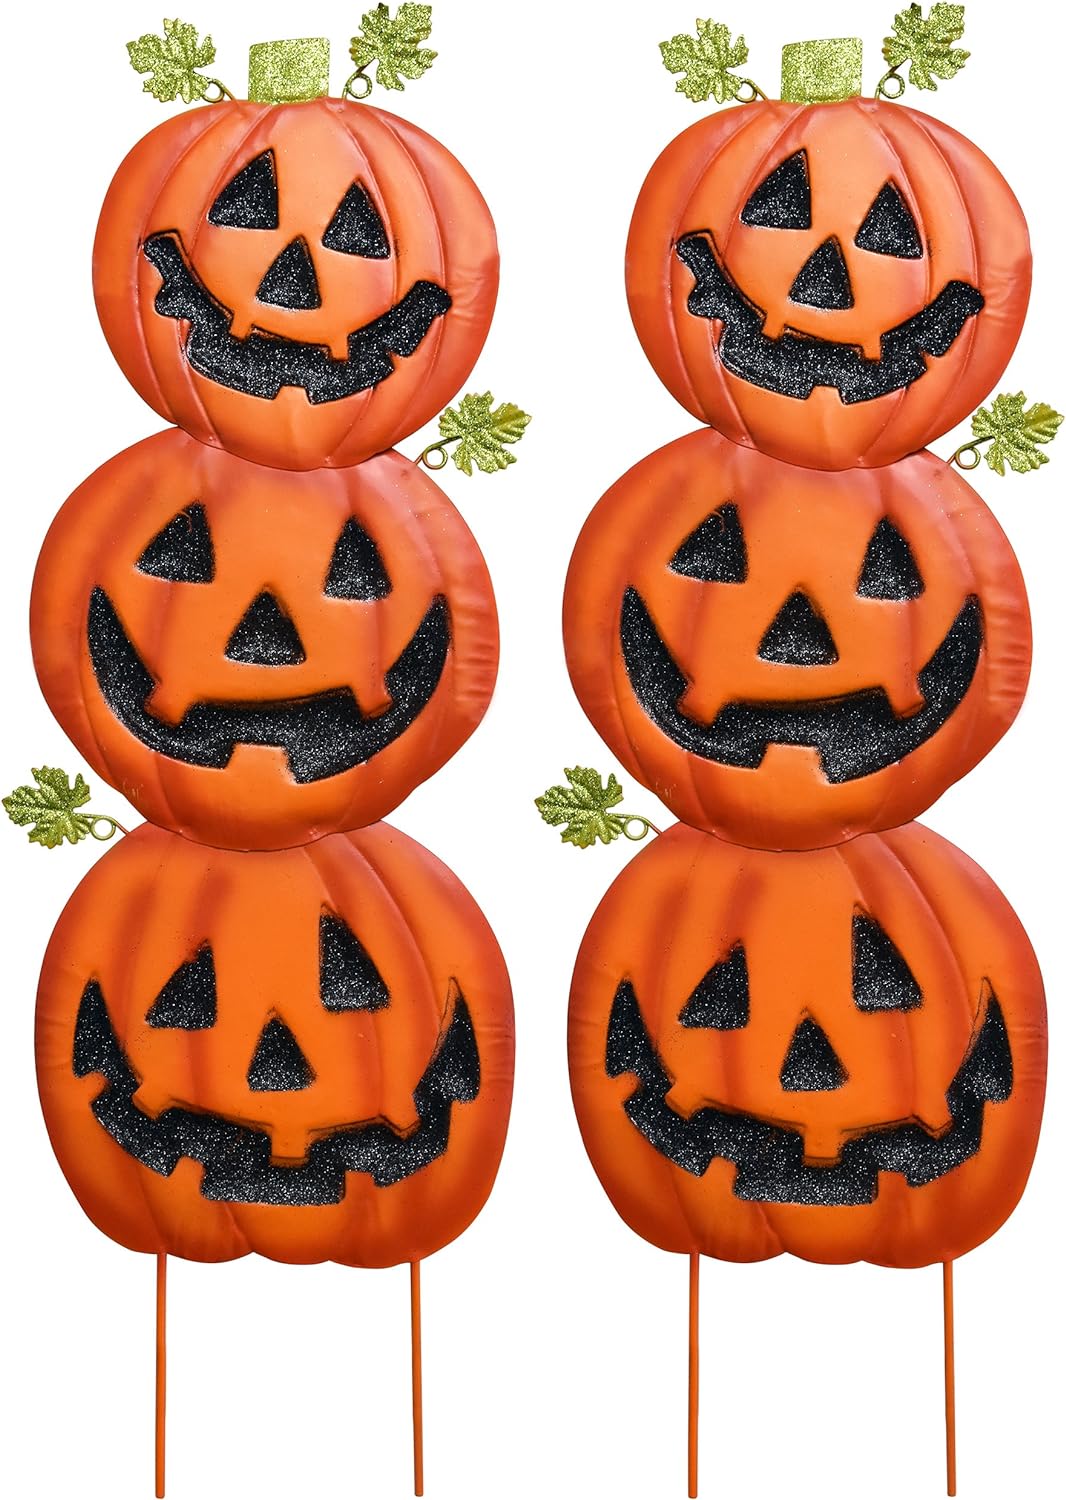 Halloween Jack-O-Lantern Pumpkin Yard Stakes Decorations Set of 2 Metal Thanksgiving Harvest Stacked Pumpkins Garden Stake Signs Outdoor Holiday Fall Decor for Lawn Patio Home Autumn Party Supplies